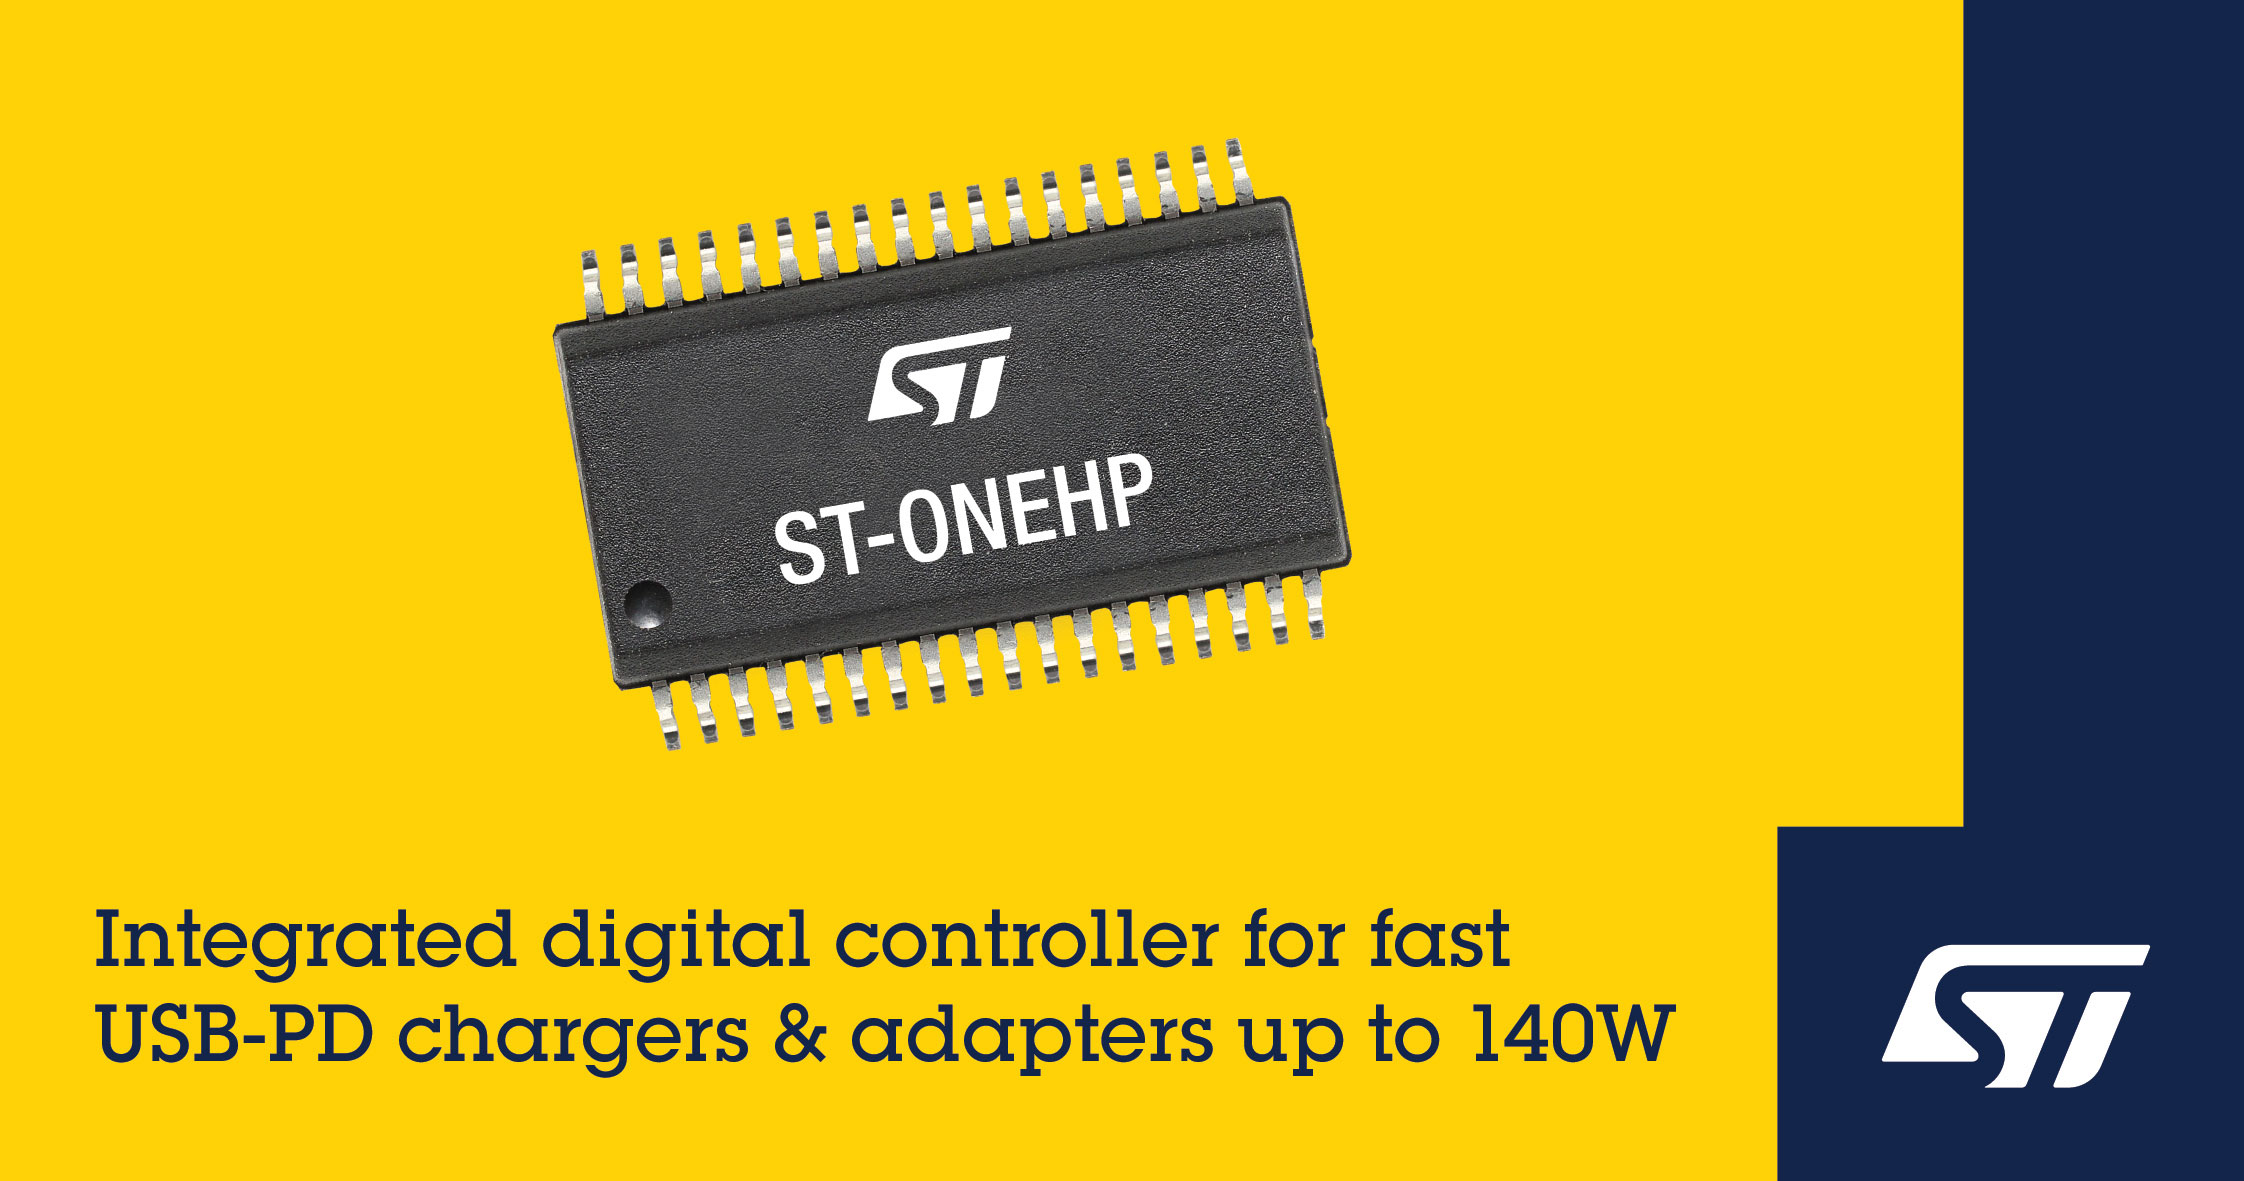 STMicroelectronics Grows ST-ONE Controller Family for USB Power Delivery Applications up to 140W